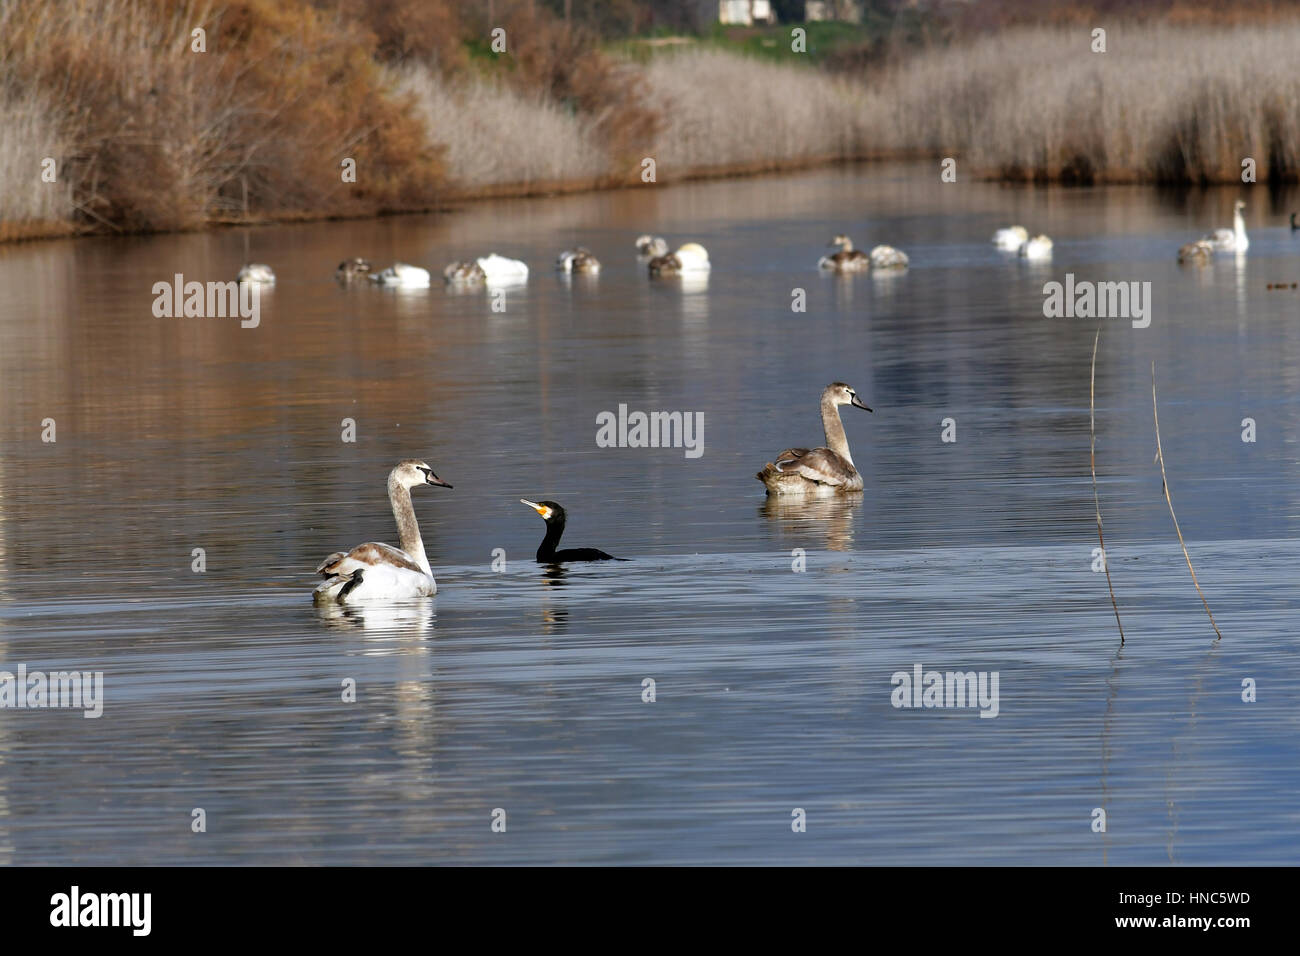 Outbreaks of bird flu in swans in Arcadia, Saturday, February 11, 2017. Of  the Veterinary Office audits of the Regional Unity Arcadia come to light and new outbreaks of avian influenza in wild migratory birds and domestic birds (ducks, chickens). The new cases concern in wild swans found dead in lake taka from the Veterinary Service officials who Boat swans removed from the water and buried them. cases were also found in domestic ducks and birds; kotes- in Nestani Swans and the must .The birds were buried and all precautions taken. Stock Photo